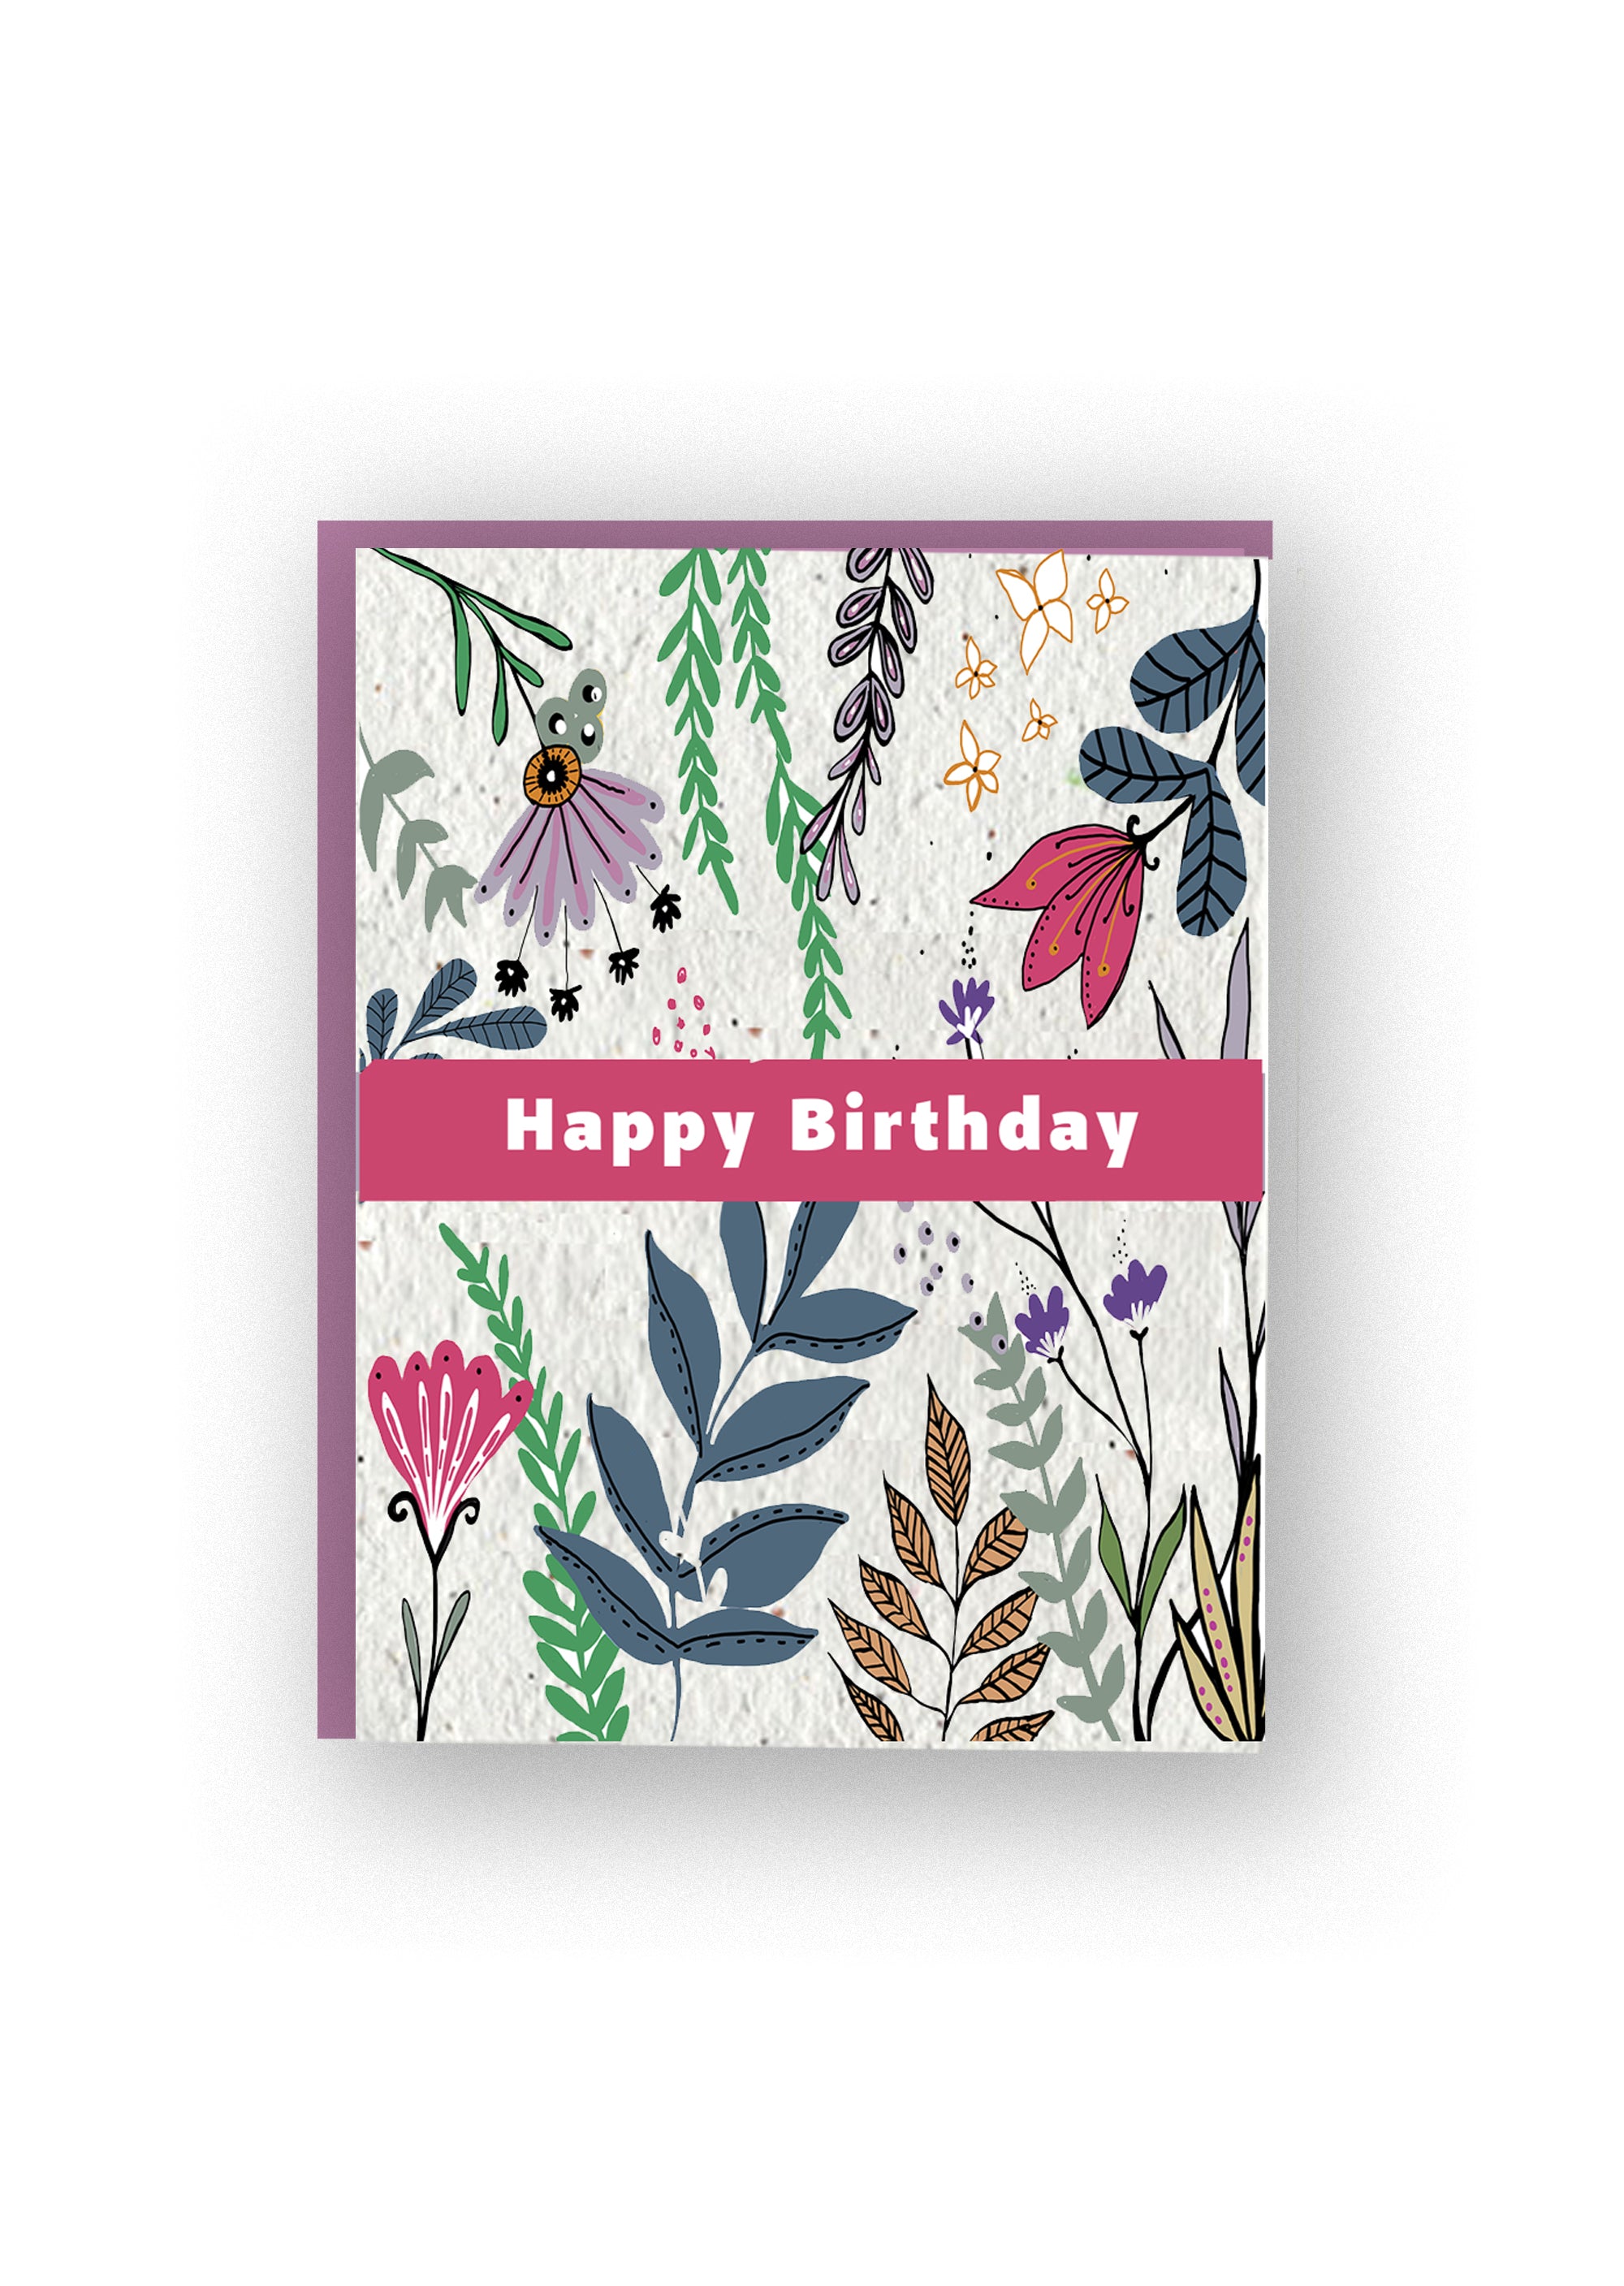 "Vibrant Wishes: Happy Birthday" Wildflower Seed Paper Card